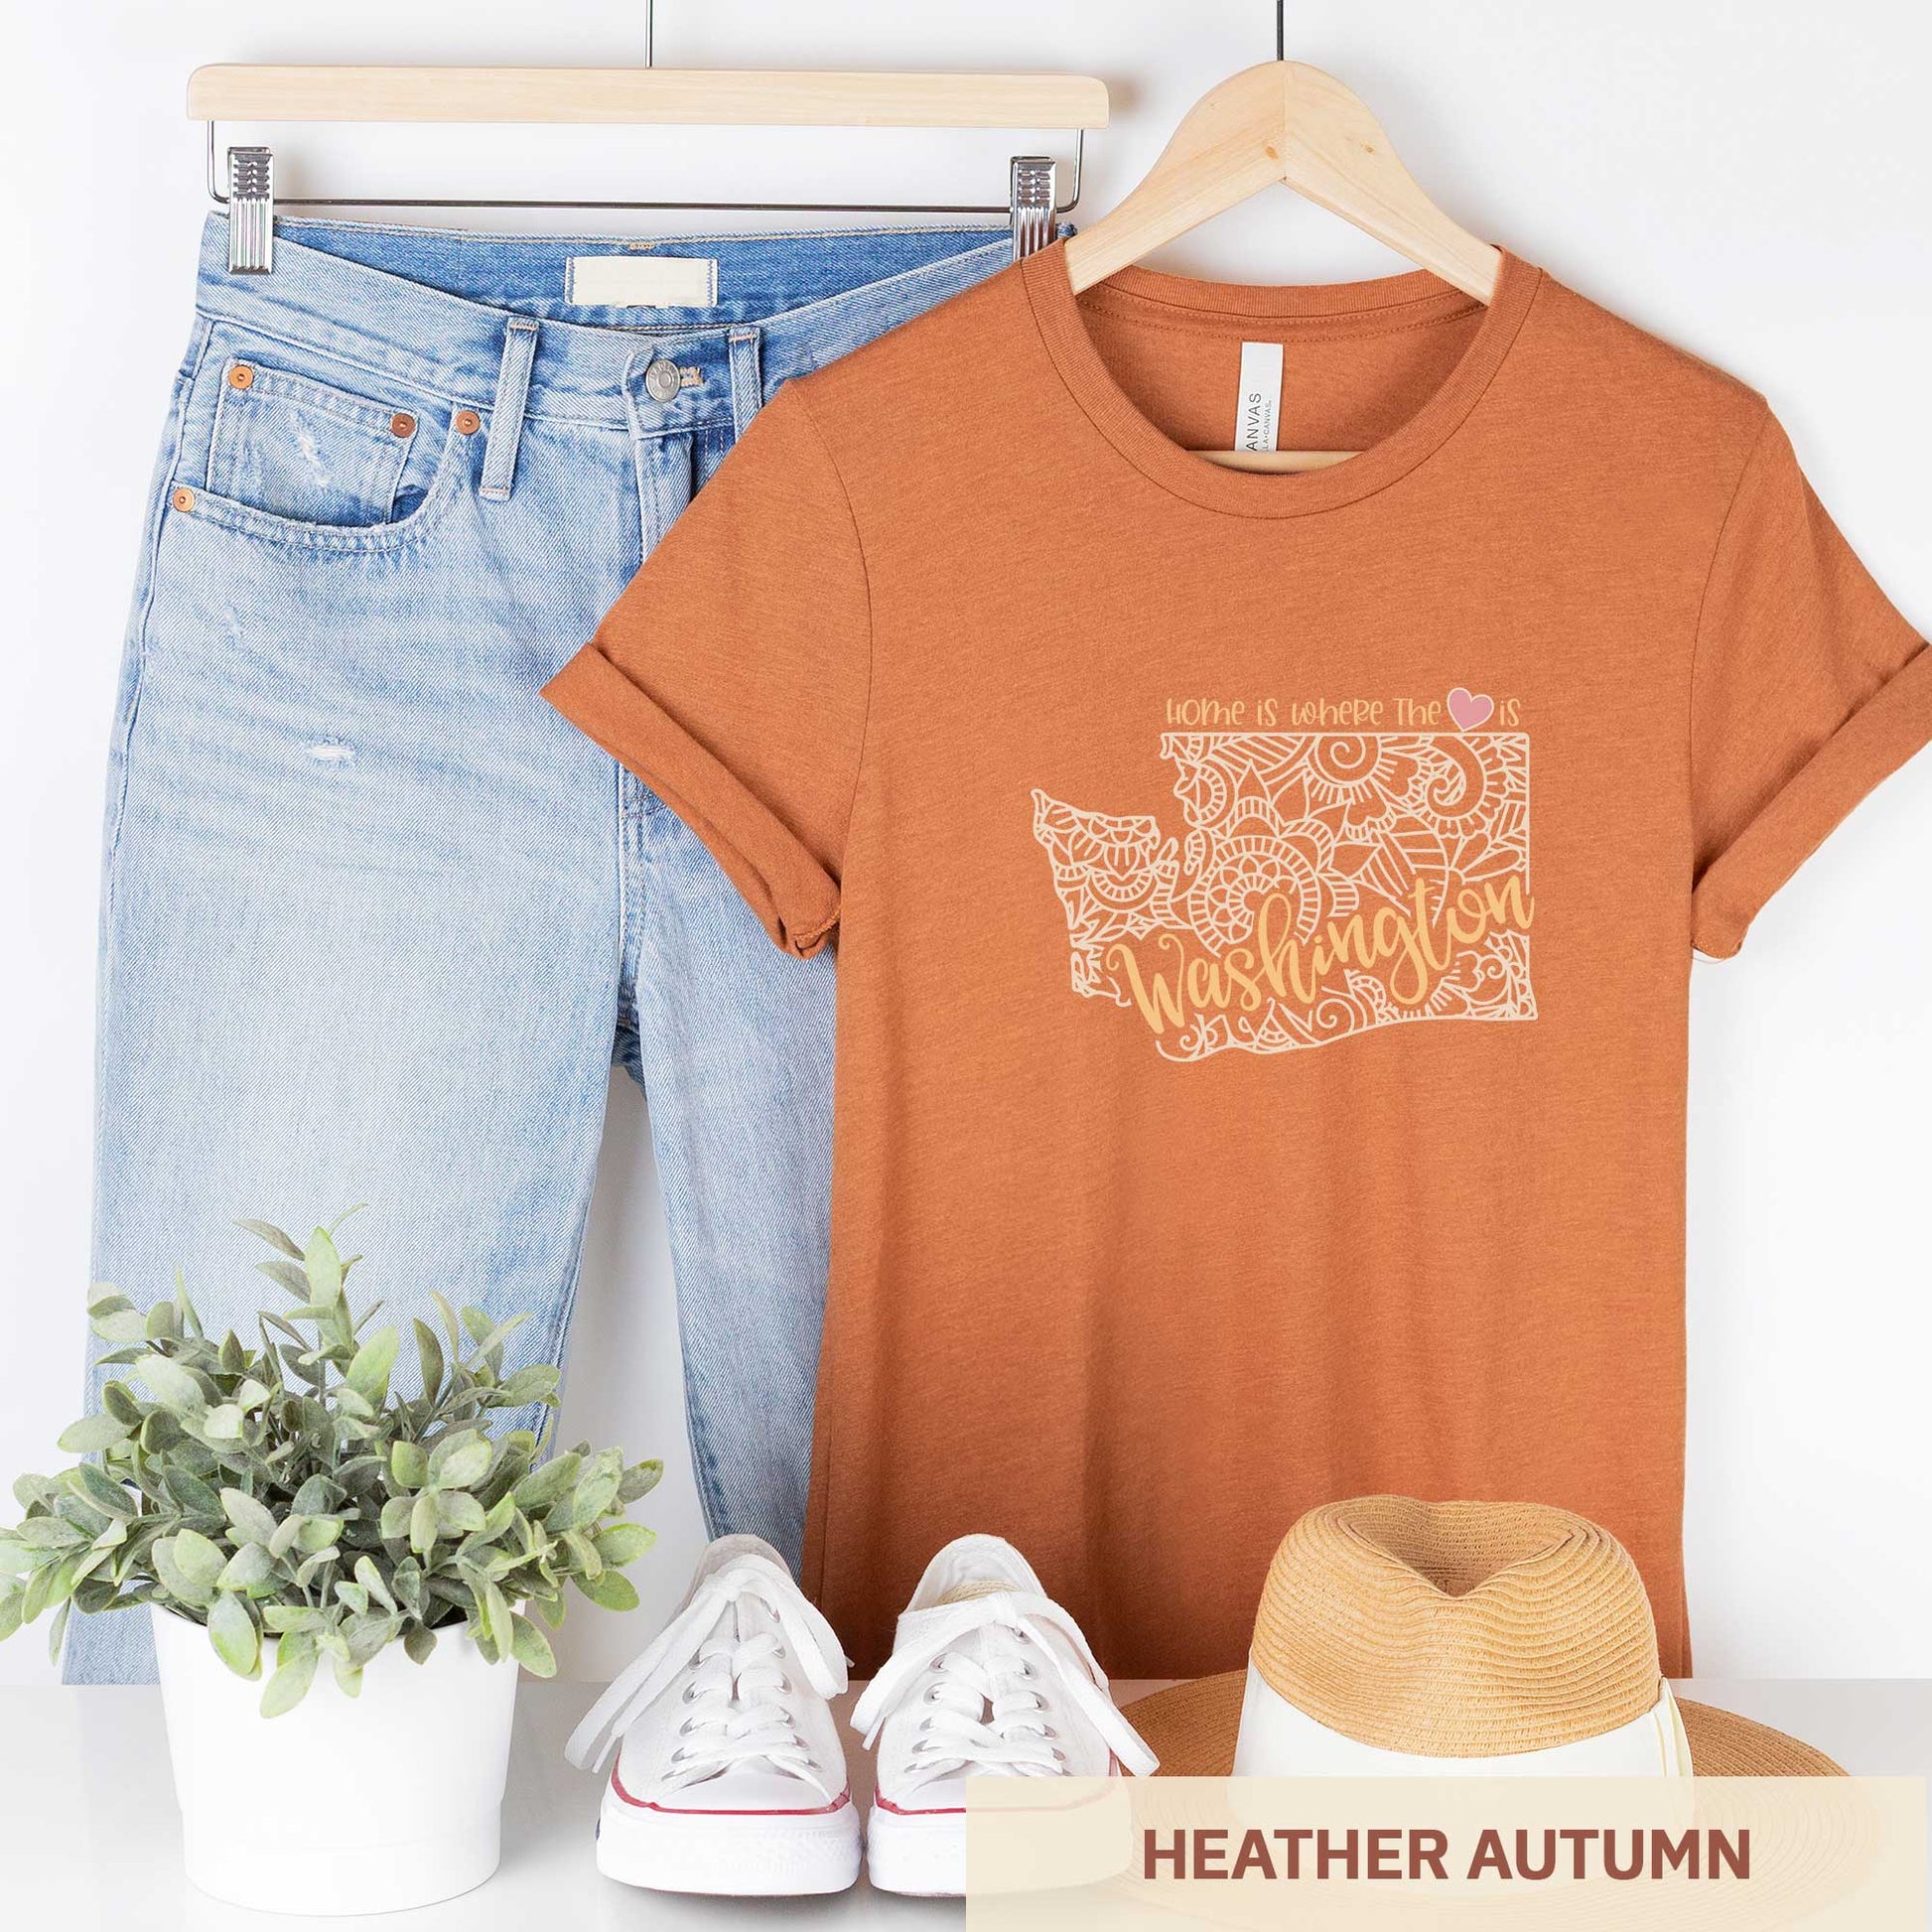 A hanging heather autumn Bella Canvas t-shirt featuring a mandala in the shape of Washington with the words home is where the heart is.